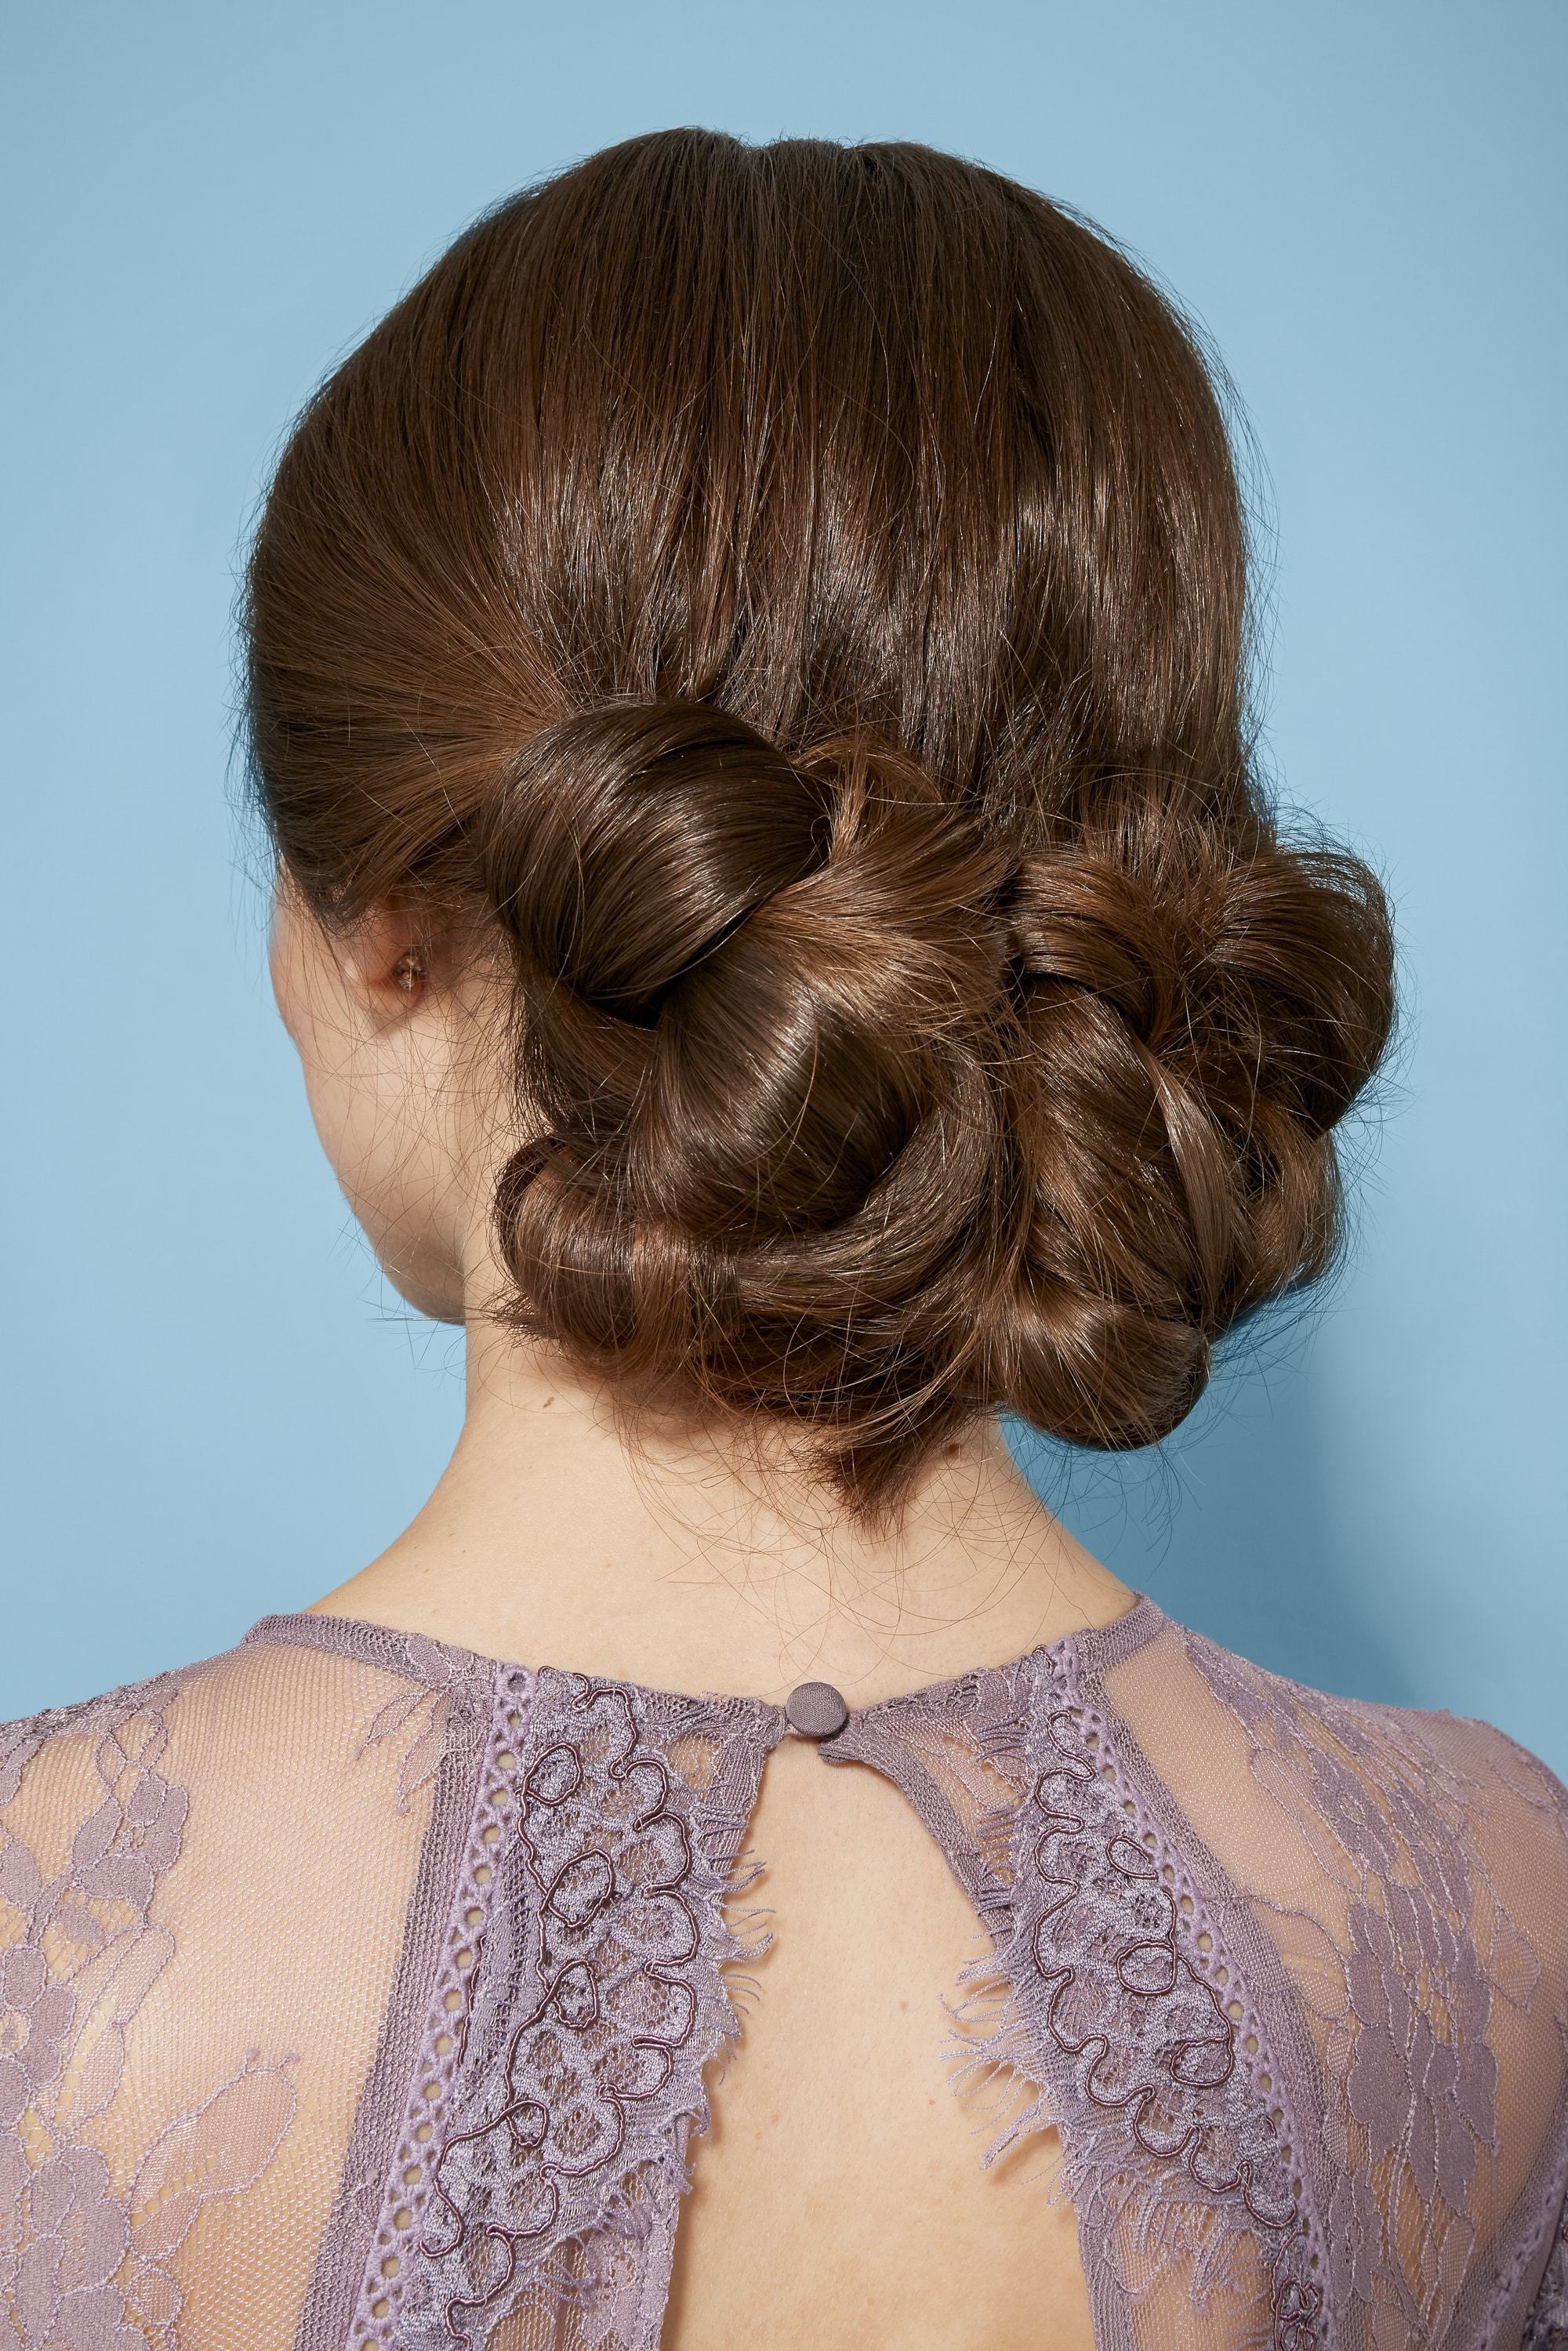 Diwali hairstyles: Close-up back view of a woman with brunette hair in a twisted chignon hairstyle